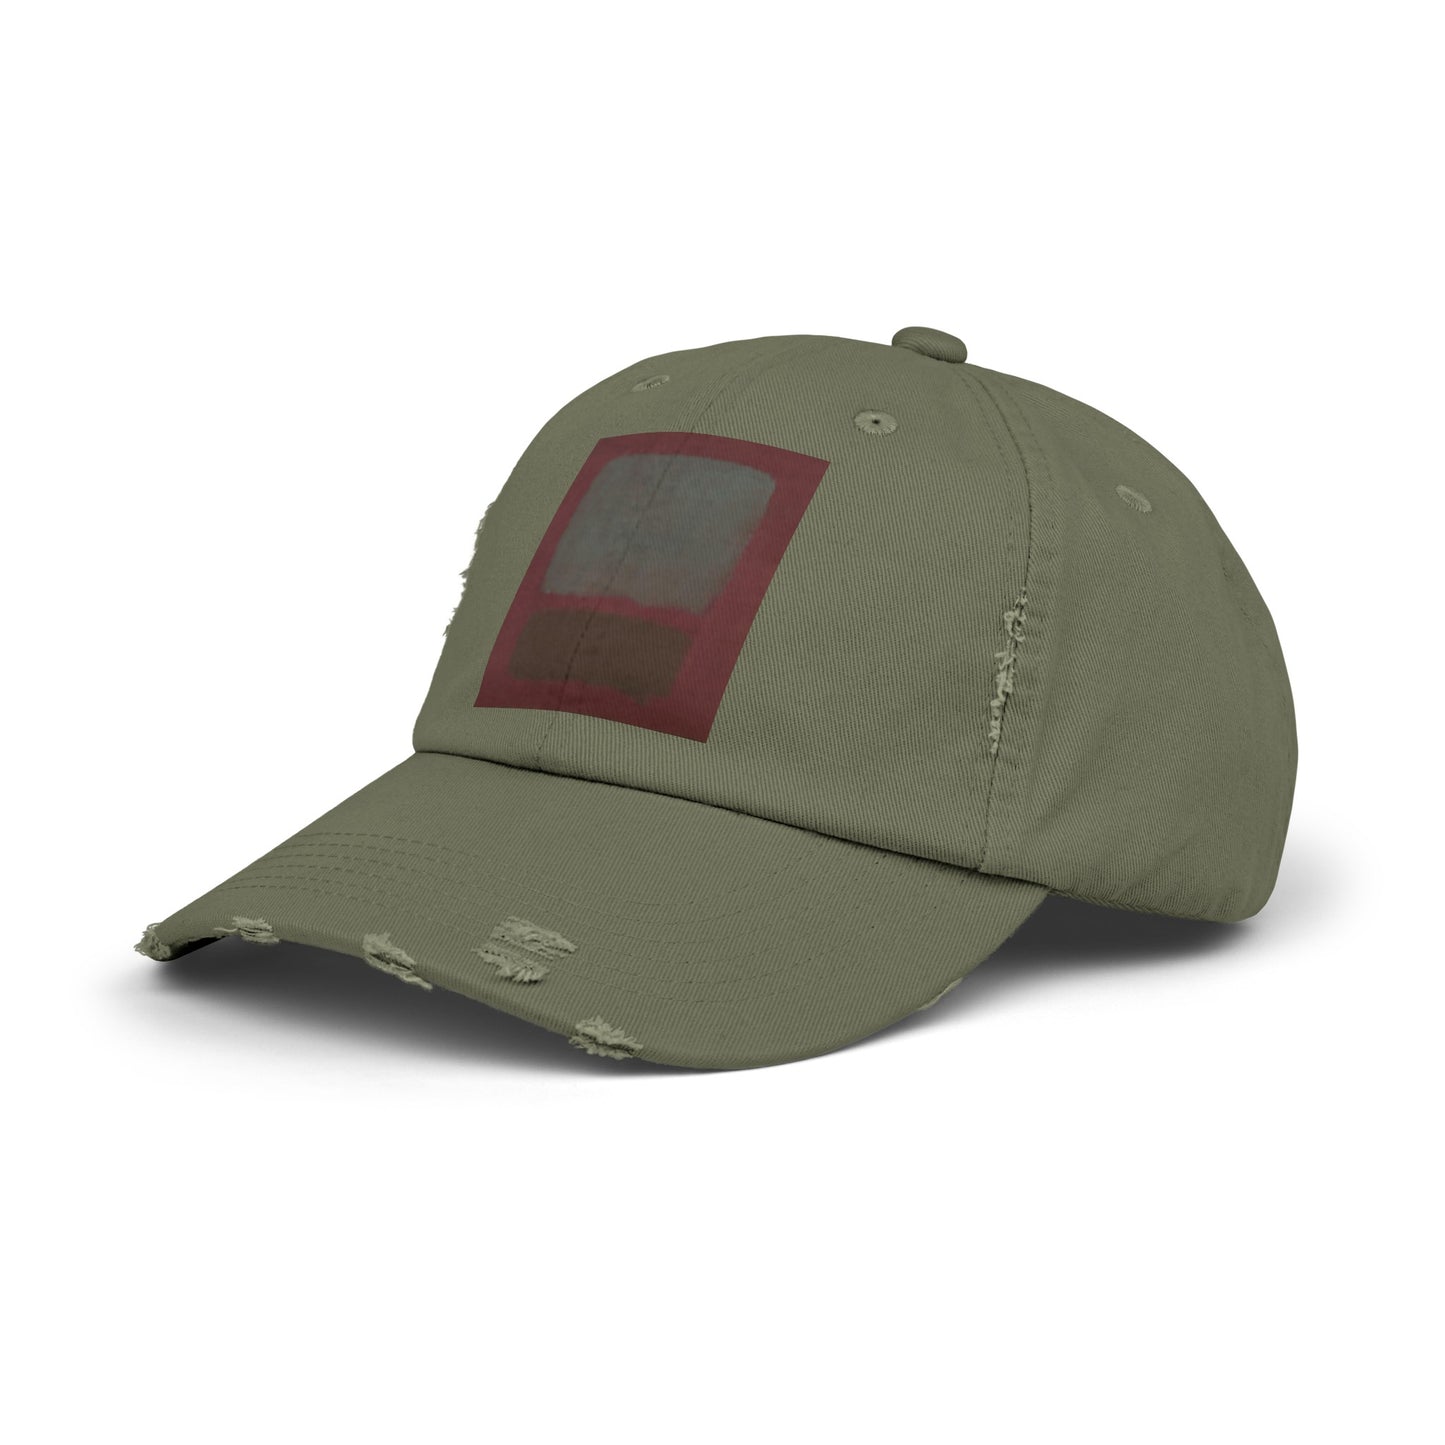 a green hat with a red patch on it